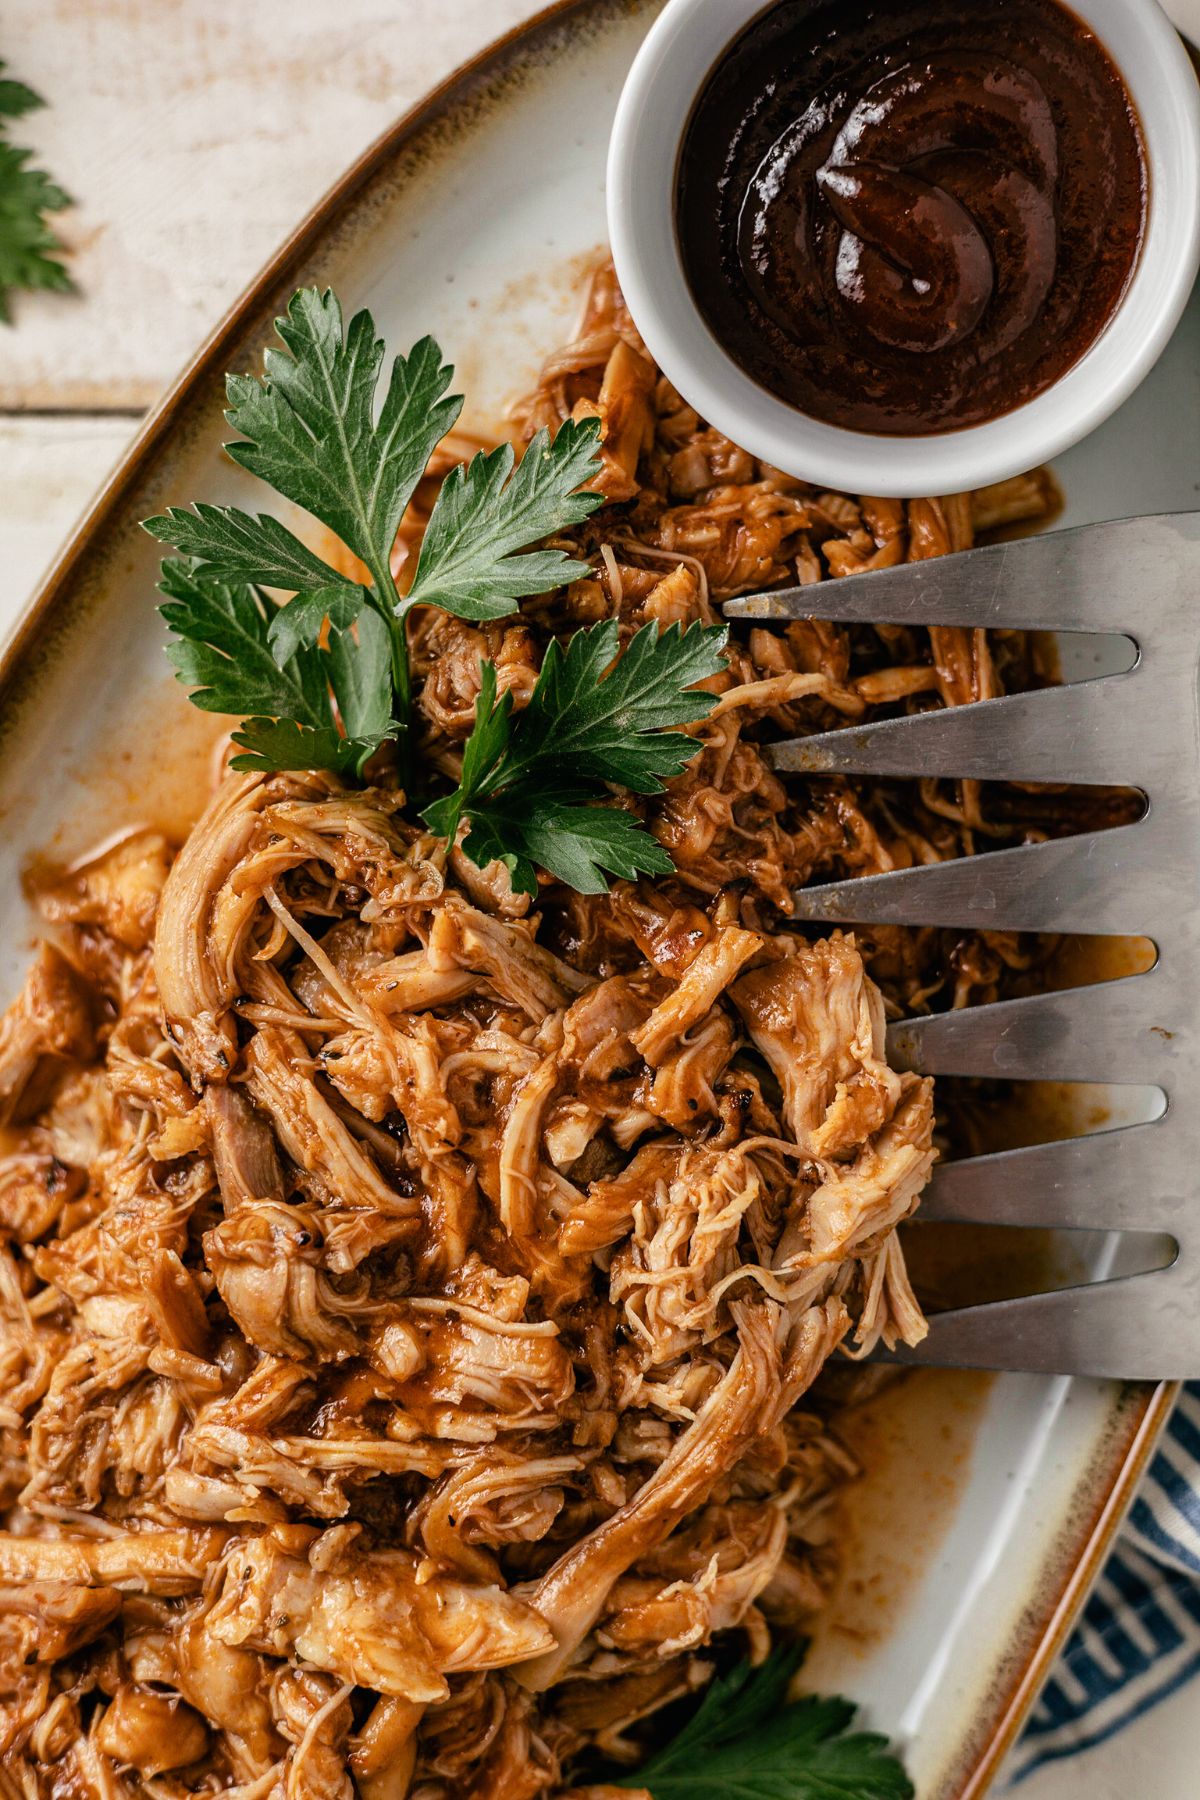 A delicious serving of juicy, pulled BBQ chicken on a large plate, with tender strands glazed in a rich, smoky barbecue sauce.